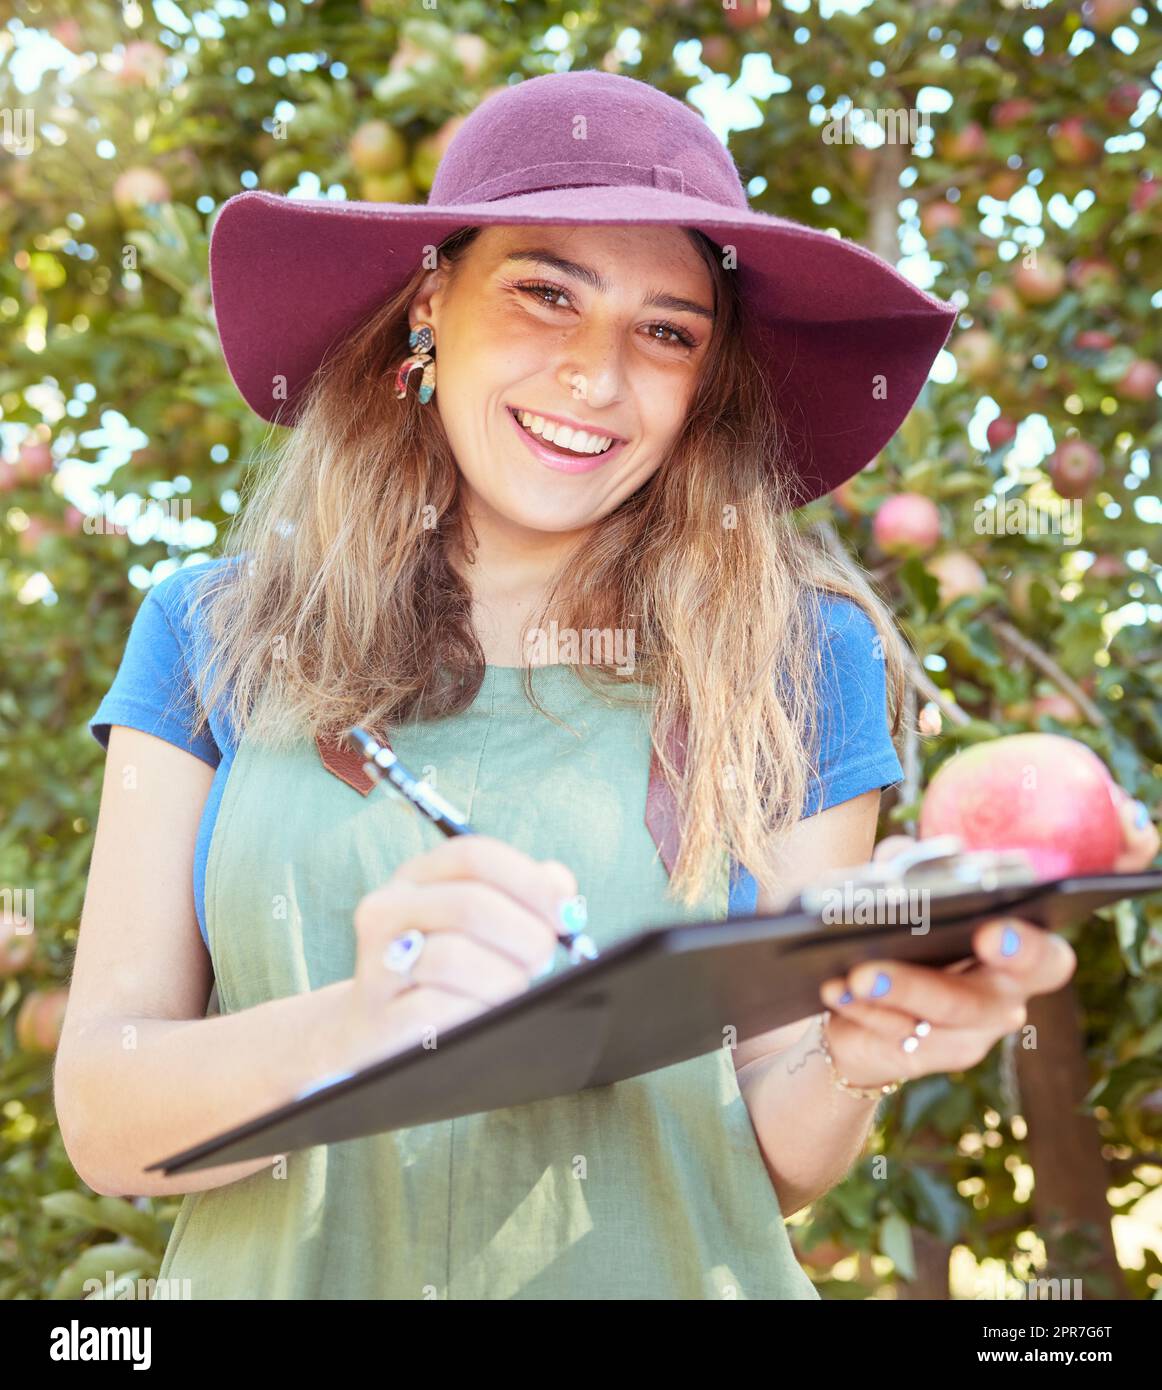 Portrait of female farm worker holding an apple while writing and making notes on a orchard farm during harvest season. Agronomist doing inspection and record keeping on the quality of produce Stock Photo